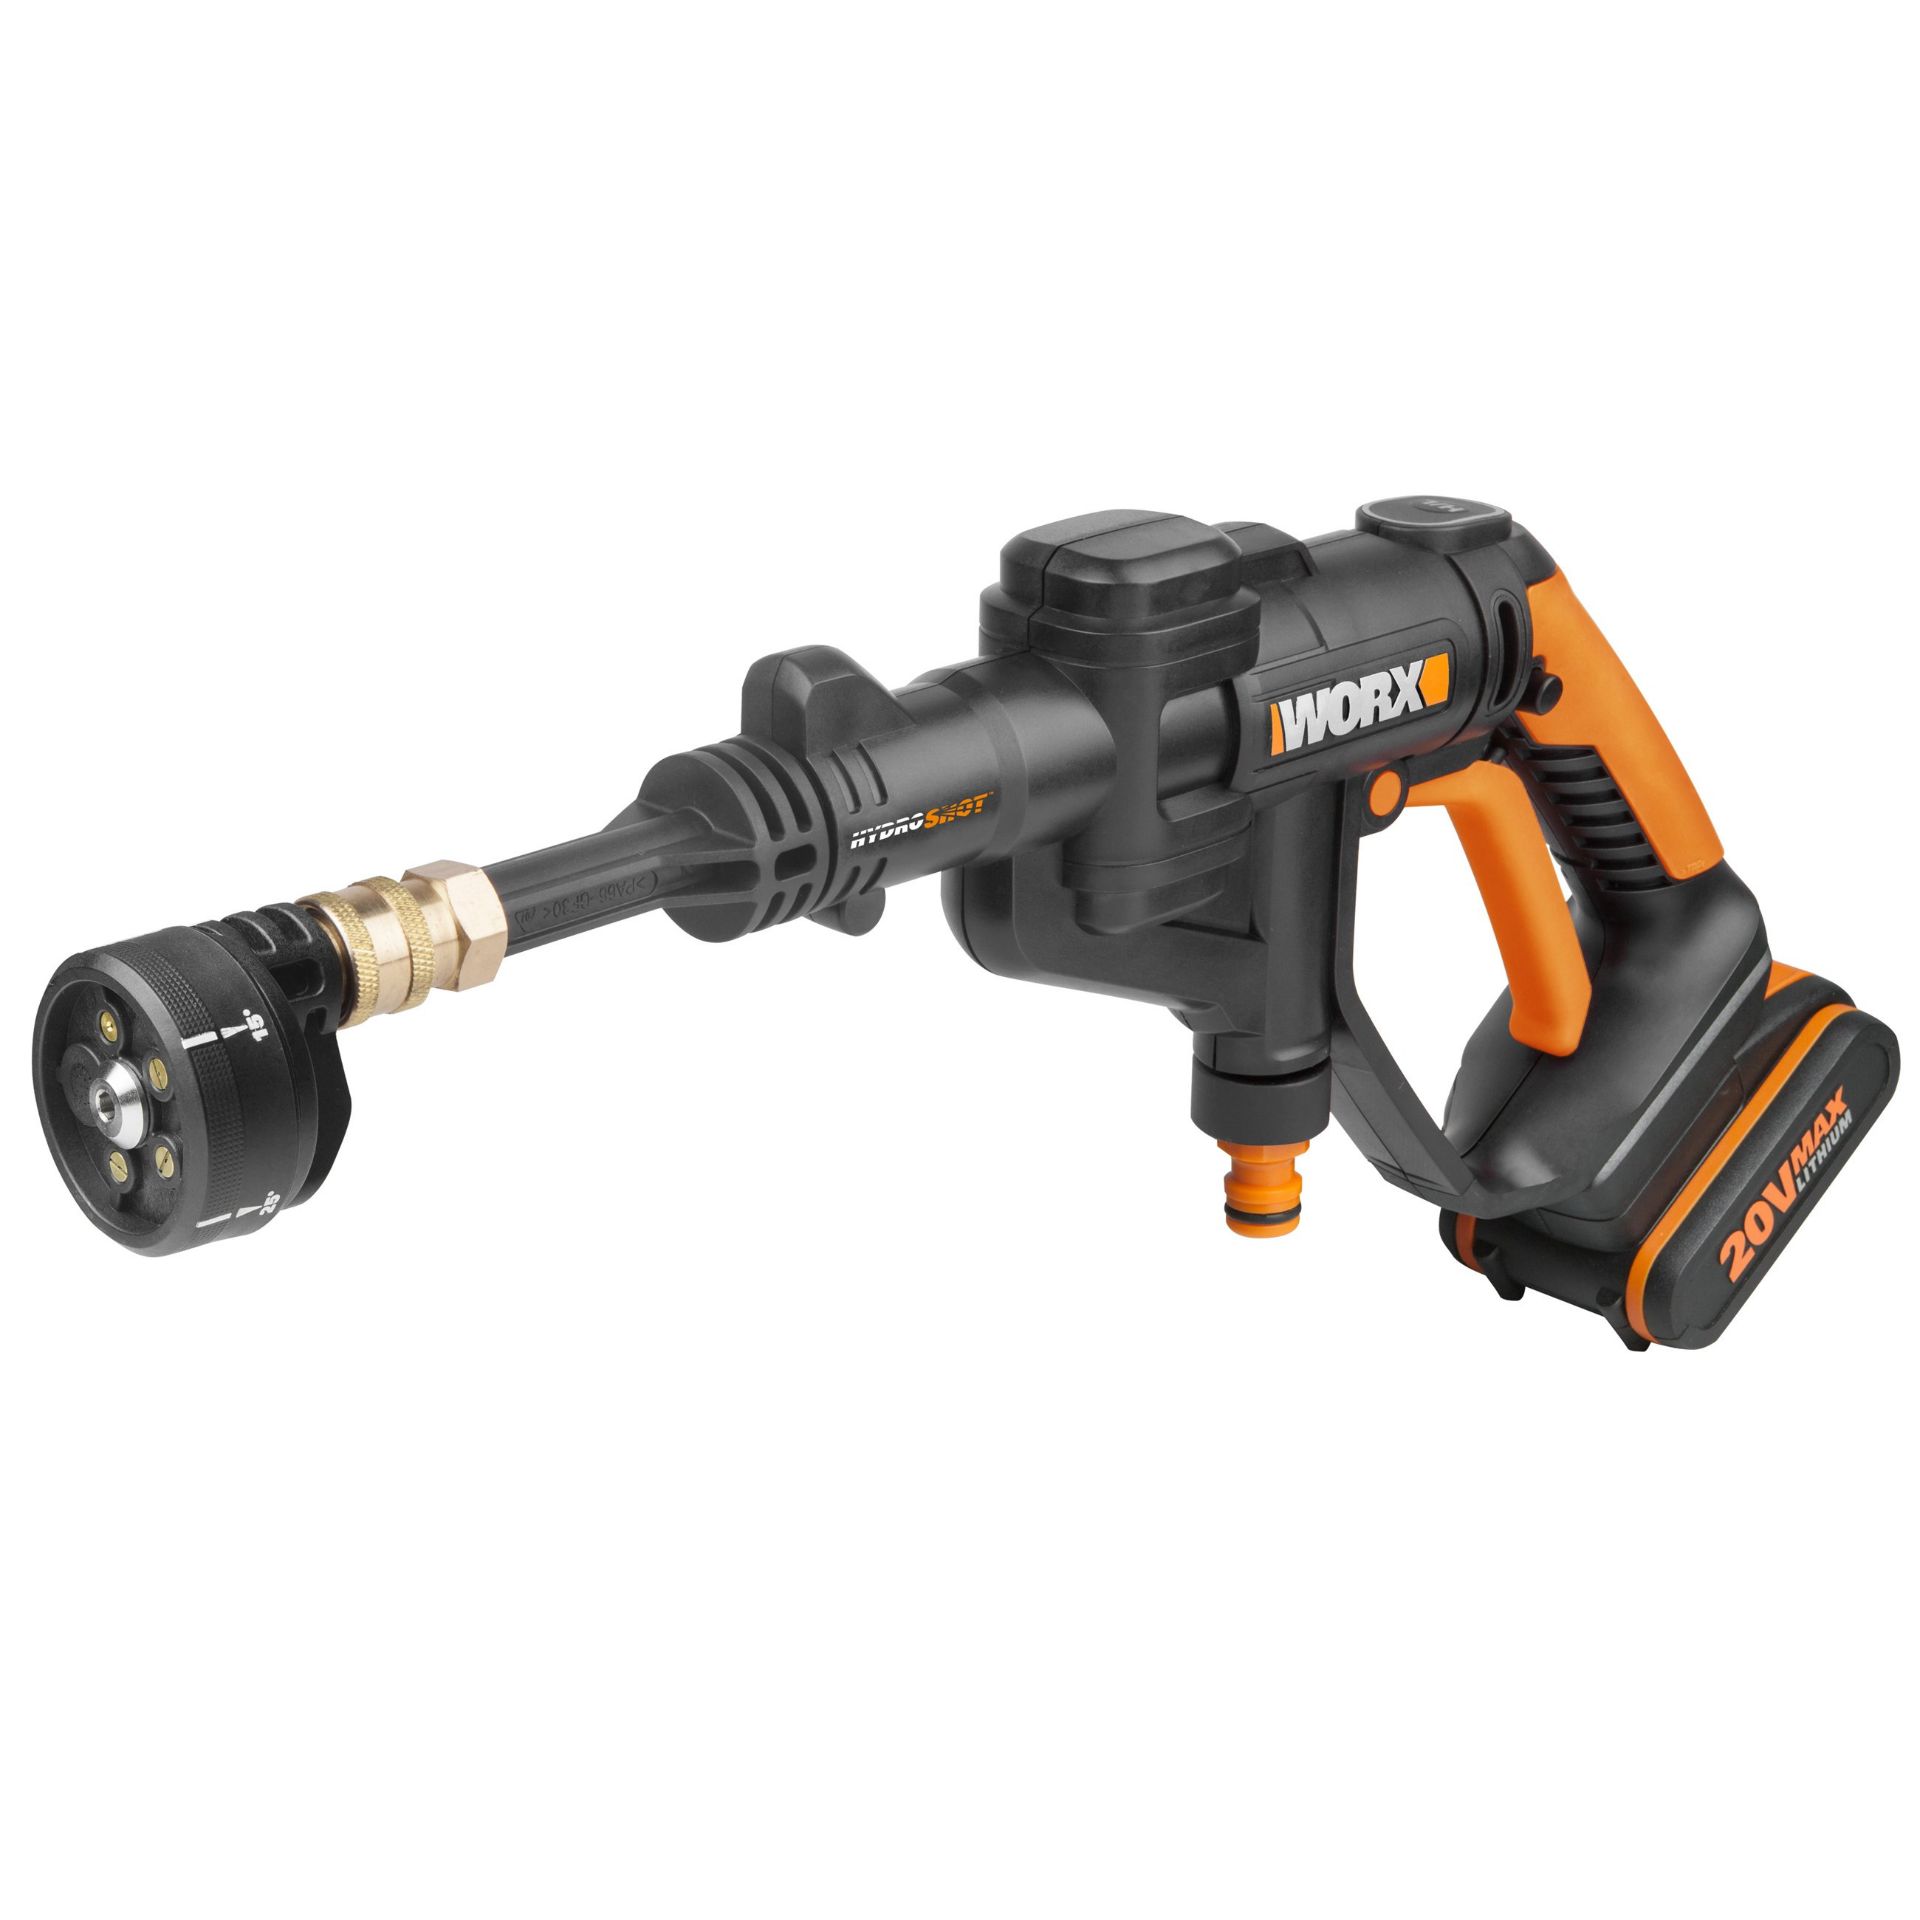 (9J) 1x Worx Hydro Shot 20V Pressure Cleaner RRP £119. (Unit Appears Clean, As New. With 1x Battery